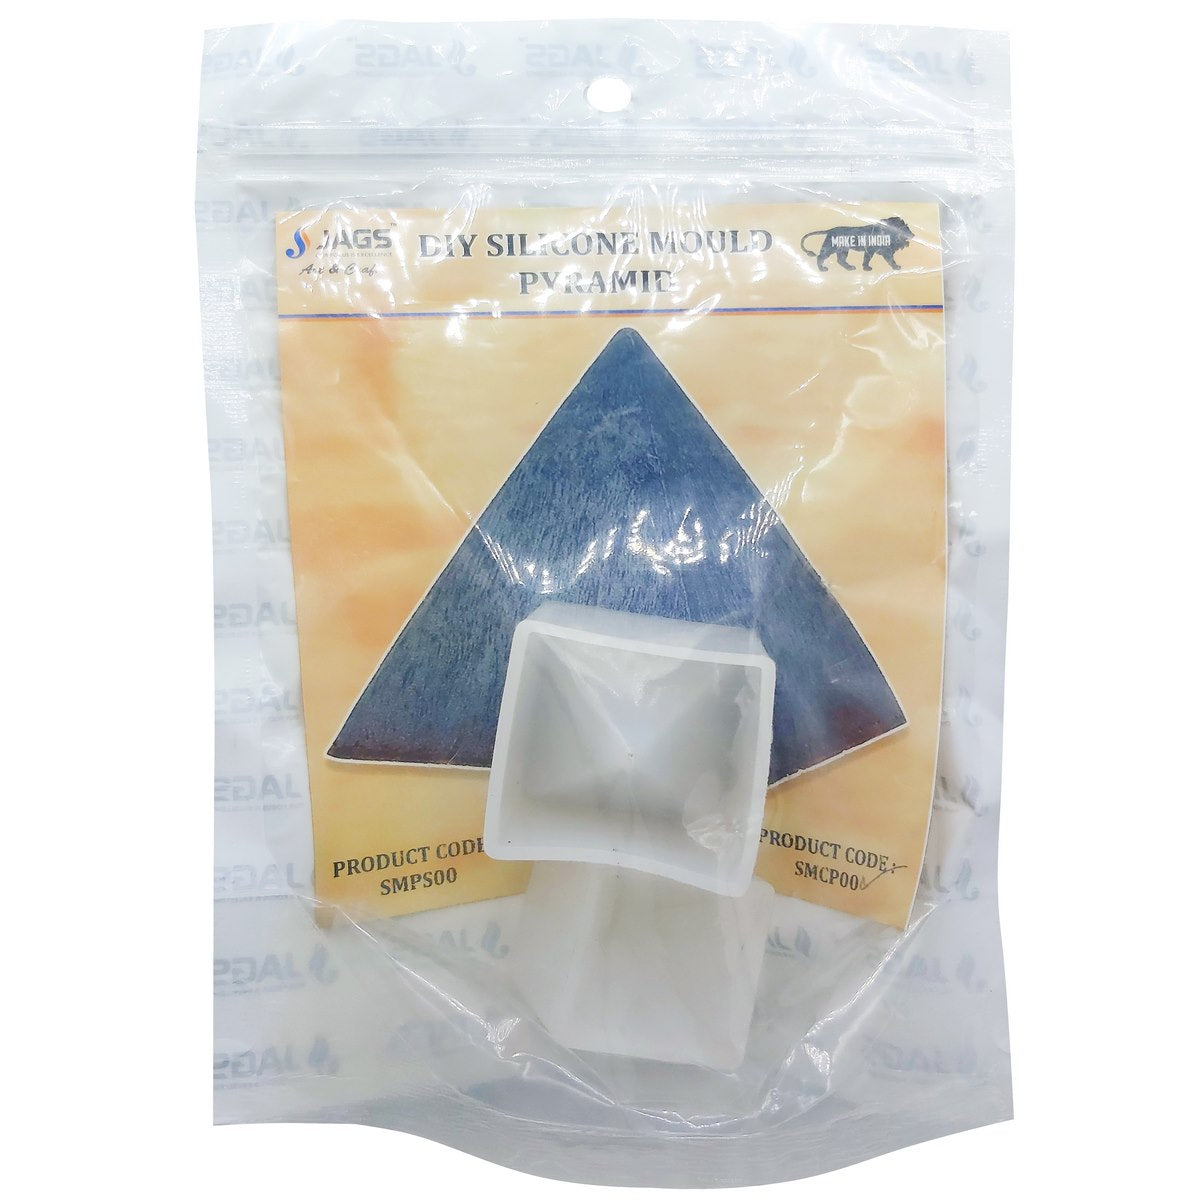 jags-mumbai Jags Silicone Mould Silicone Mould Pyramid  2PSet 30MM 1 40MM 1 SMCP00